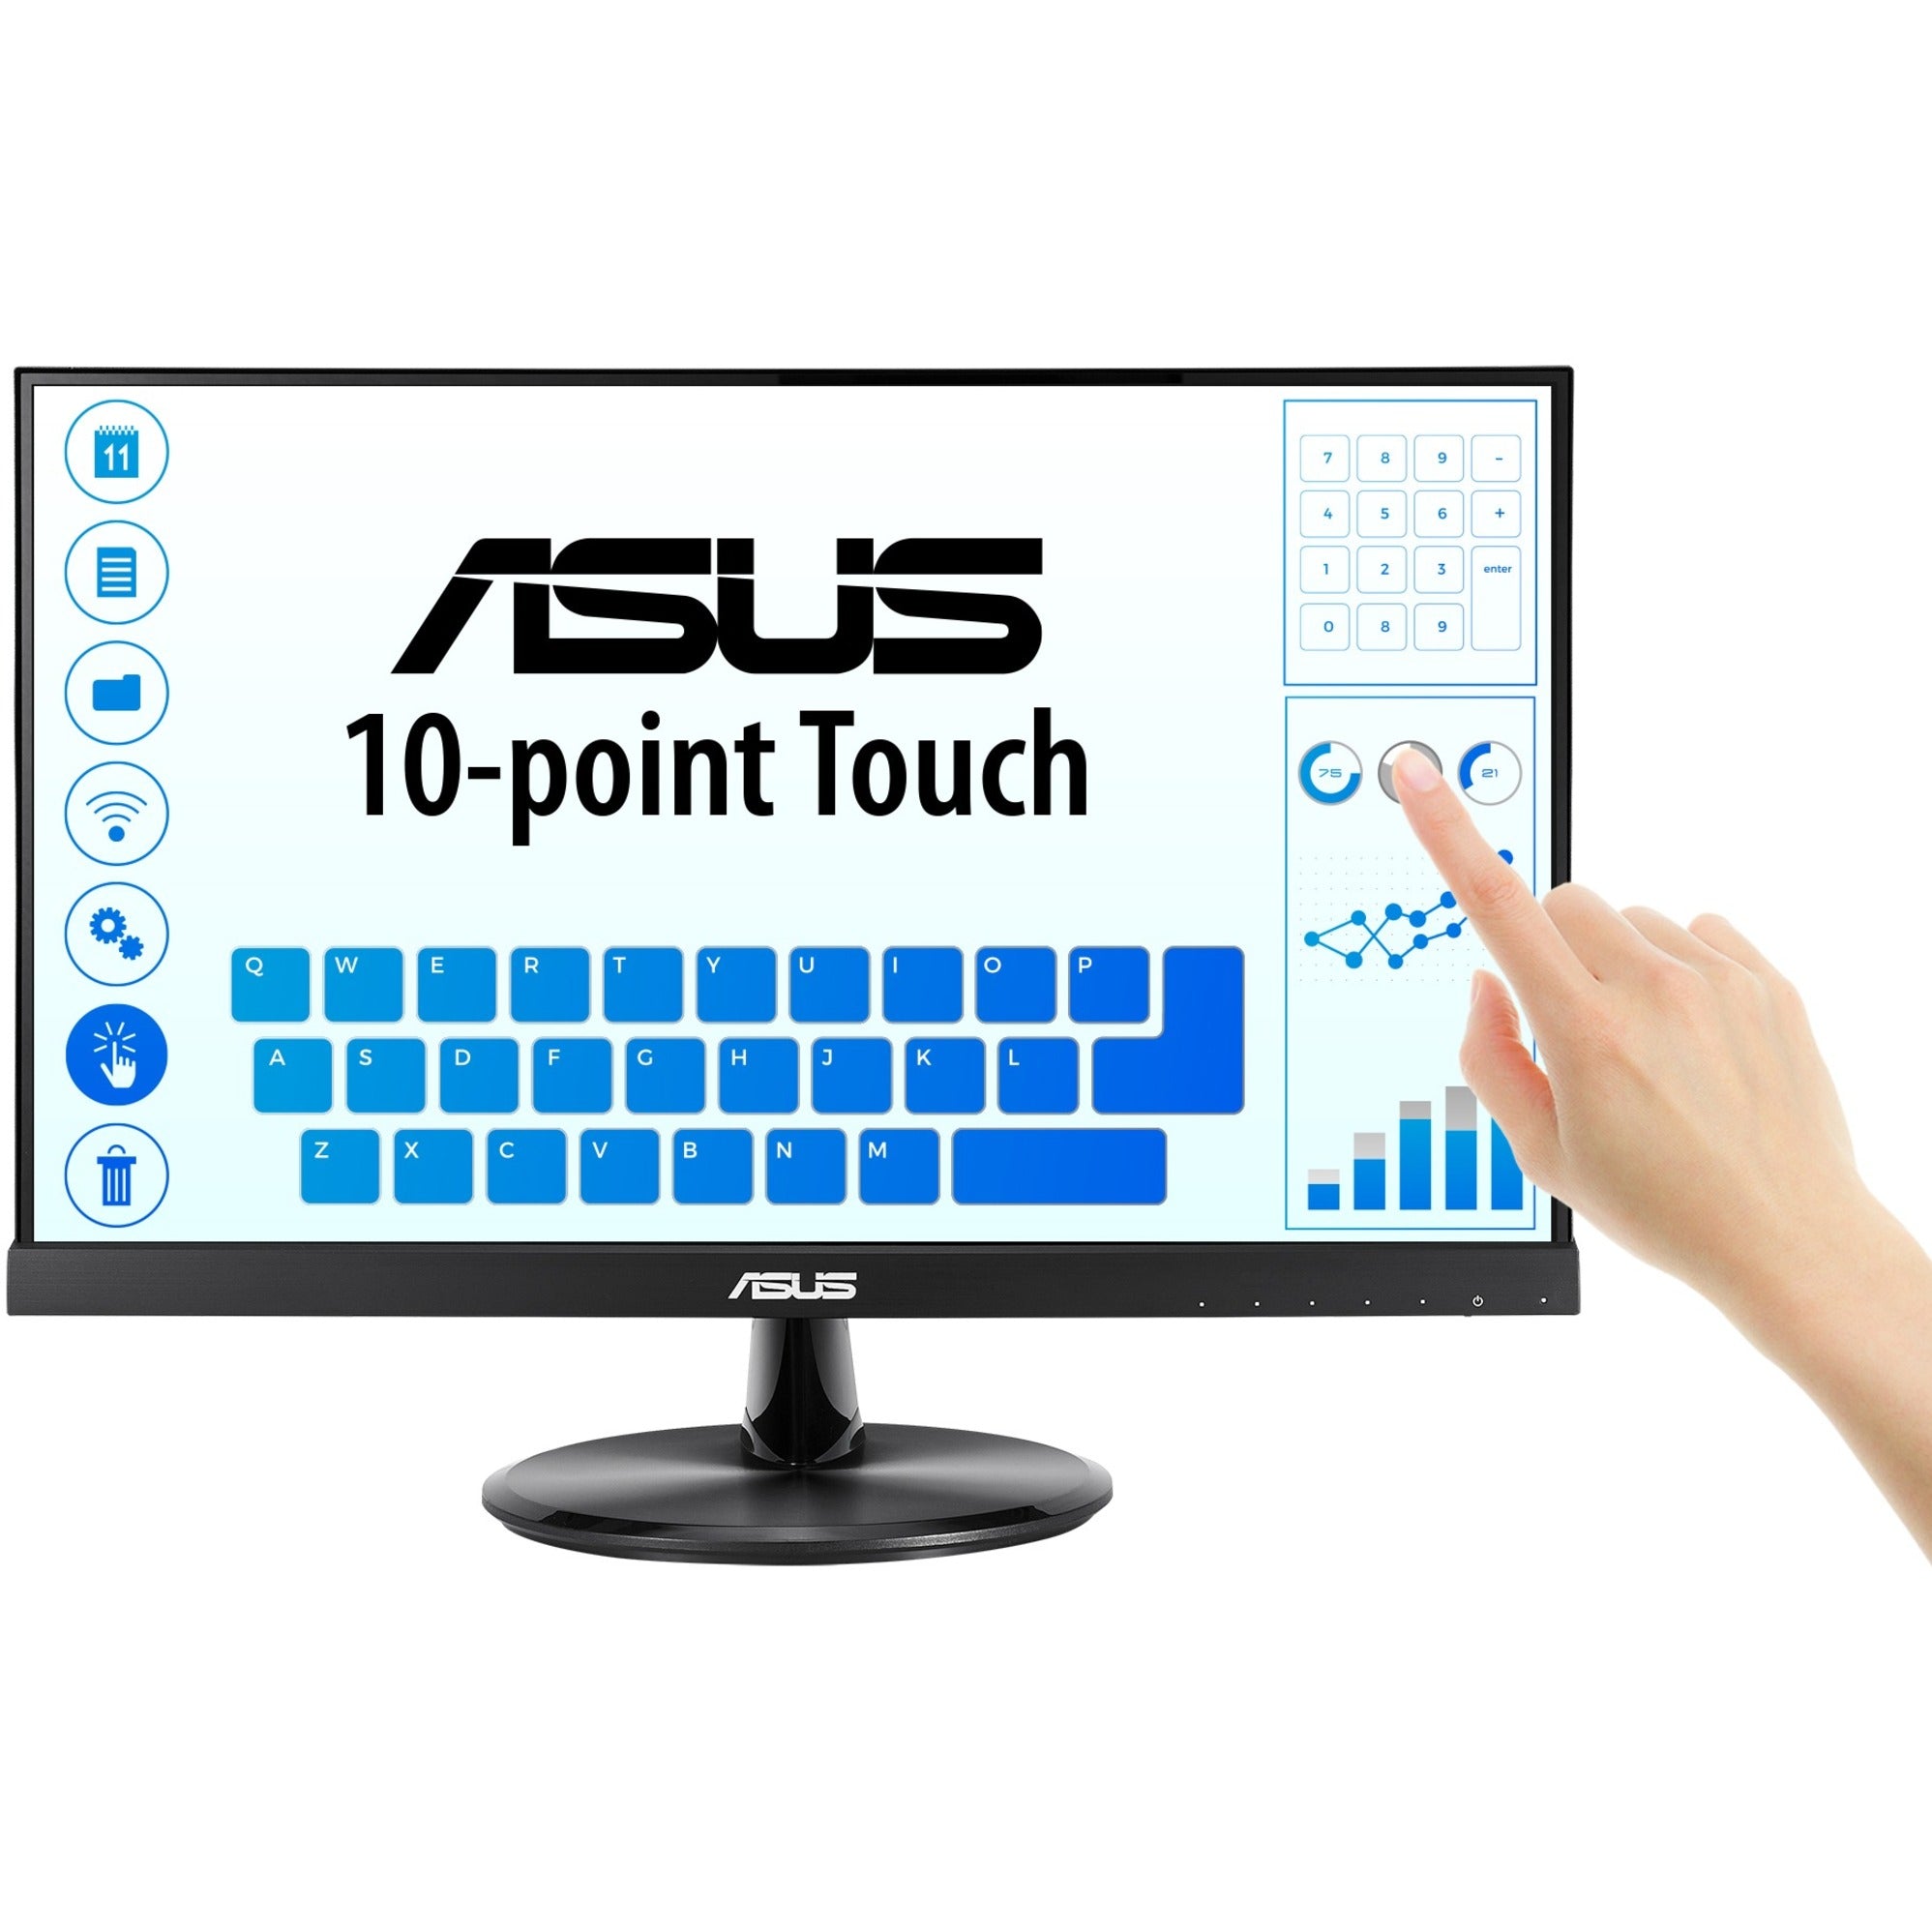 Asus LCD Touchscreen Monitor VT229H 21.5 Full HD IPS Eye Care 10-point Touch Monitor with HDMI VGA, 16:9, 5 ms GTG